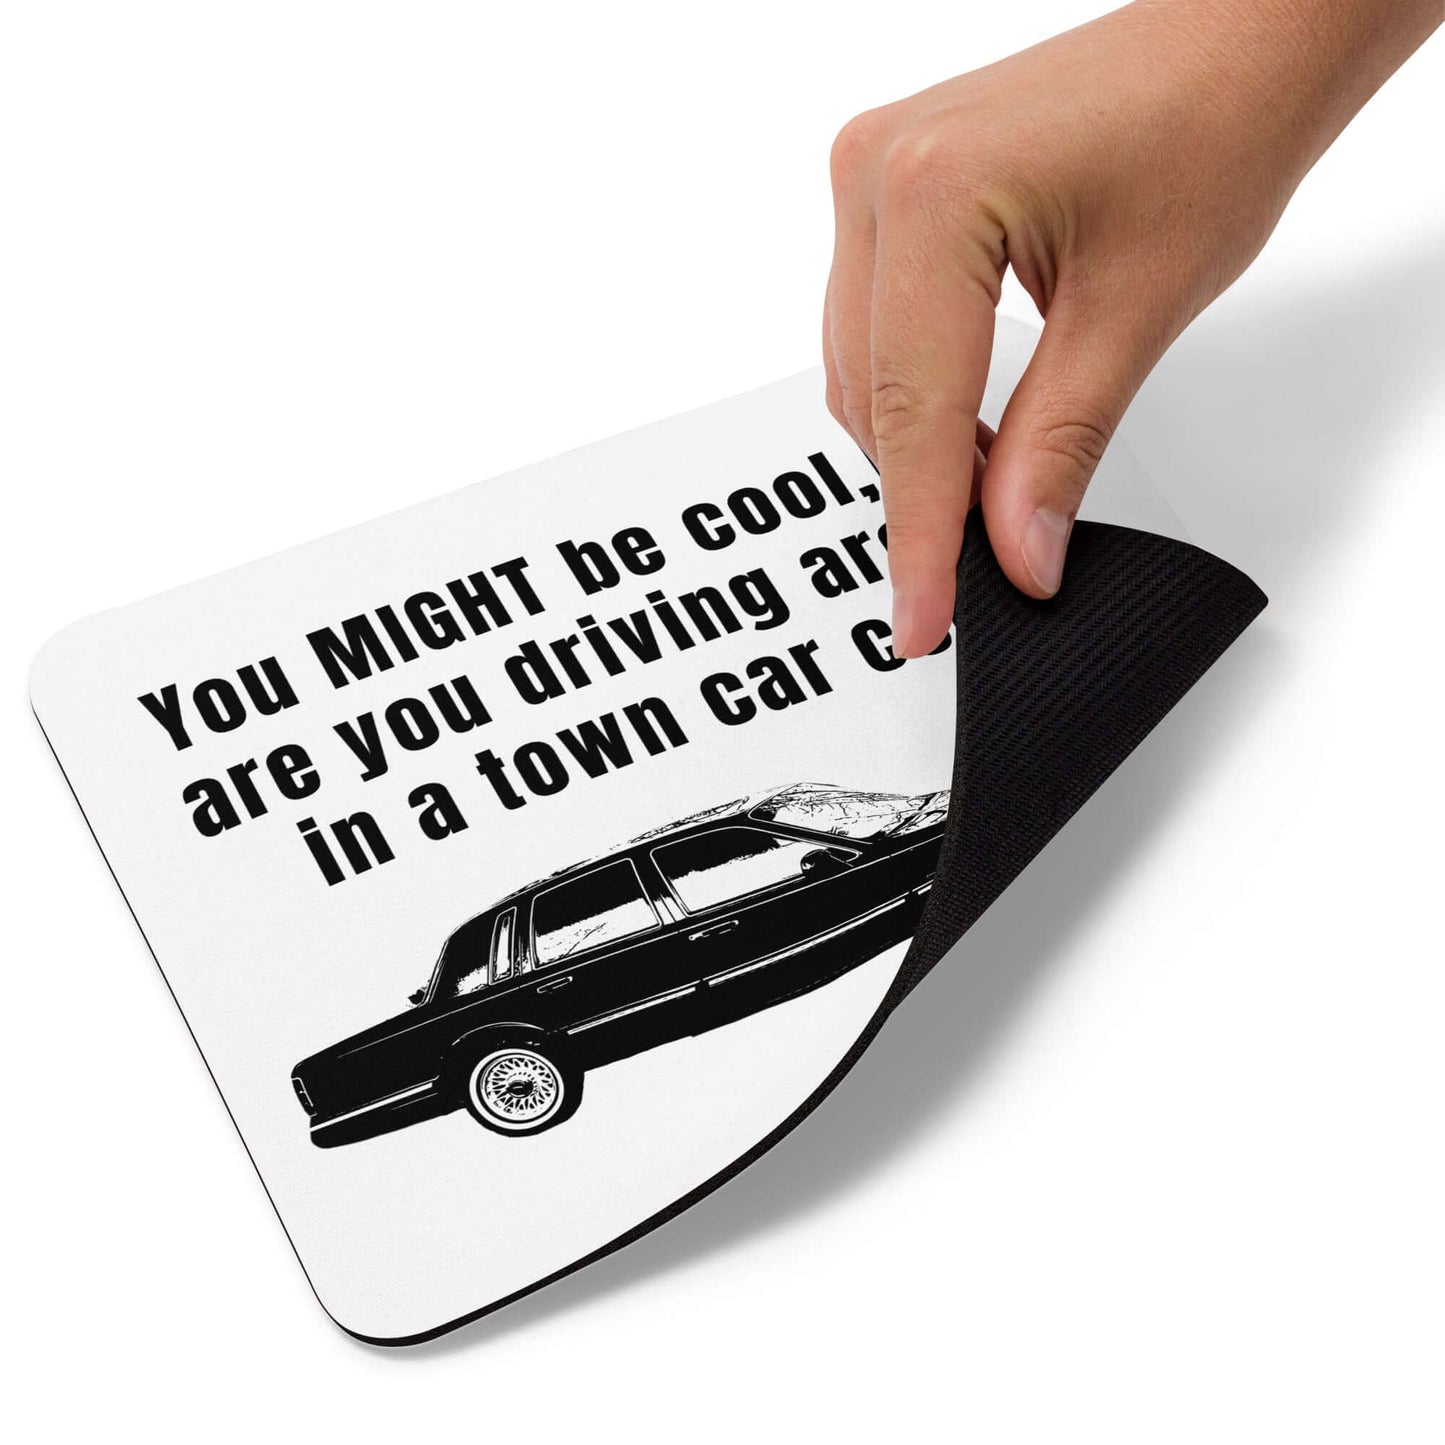 You MIGHT be cool, but are you driving around in a town car cool? - Mouse pad